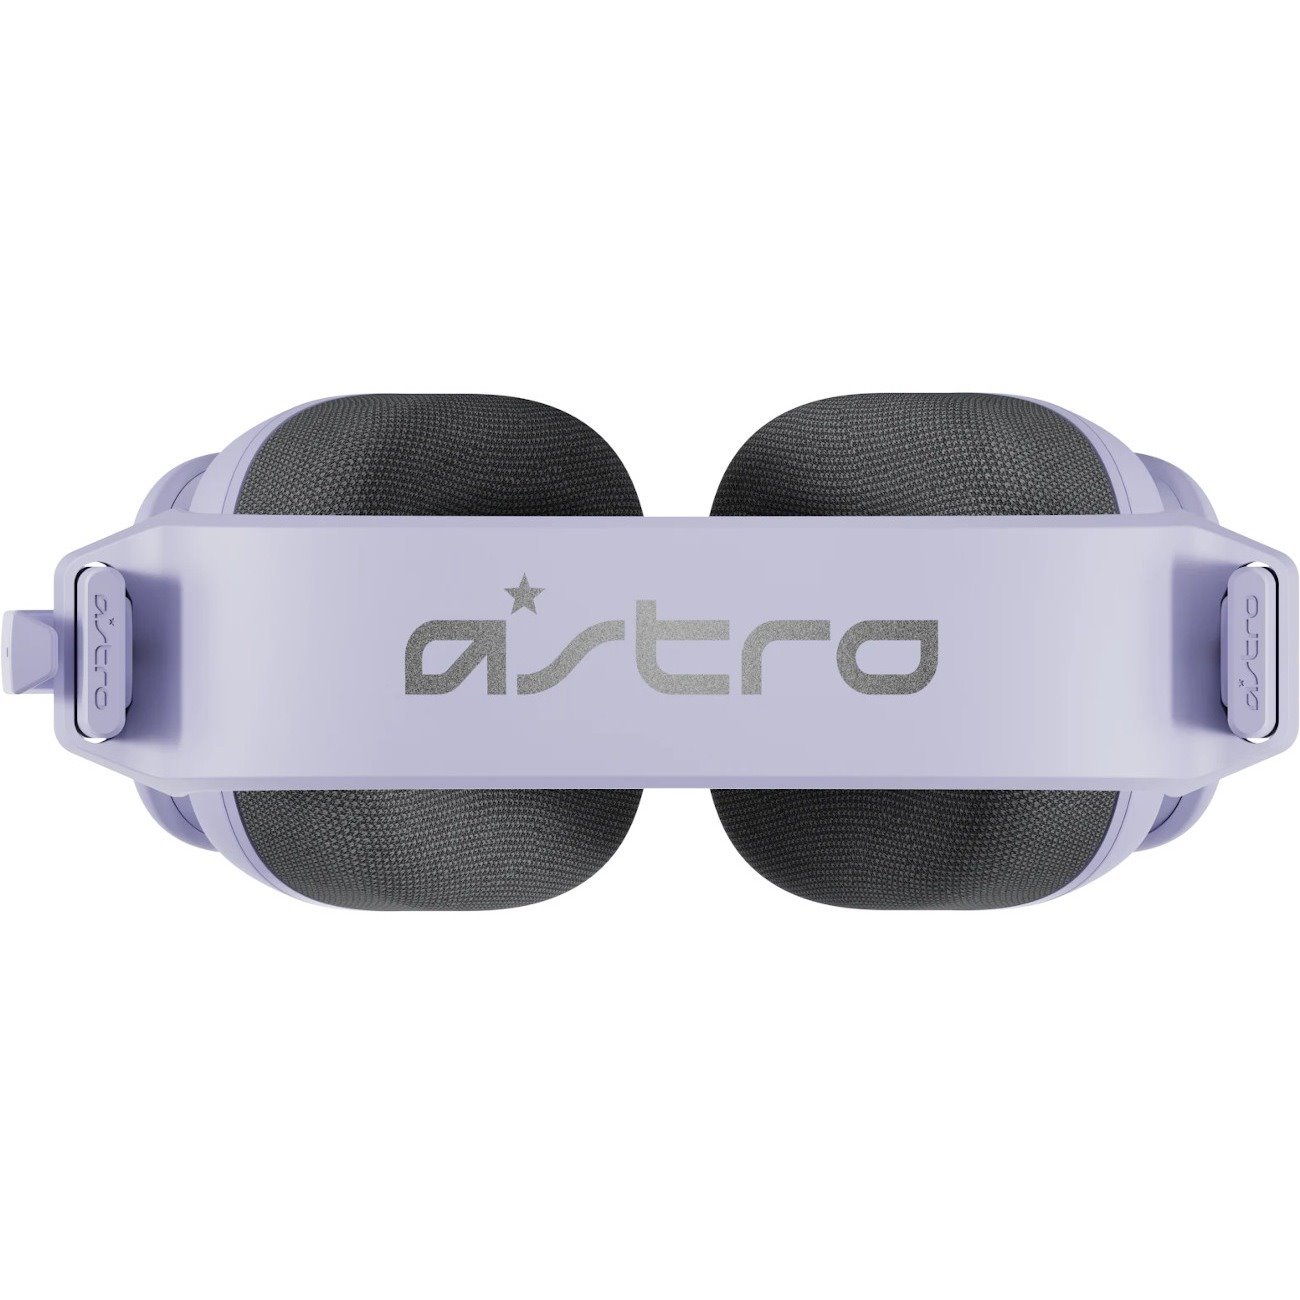 Astro A10 Gen 2 Wired Over-the-ear Stereo Gaming Headset - Lilac